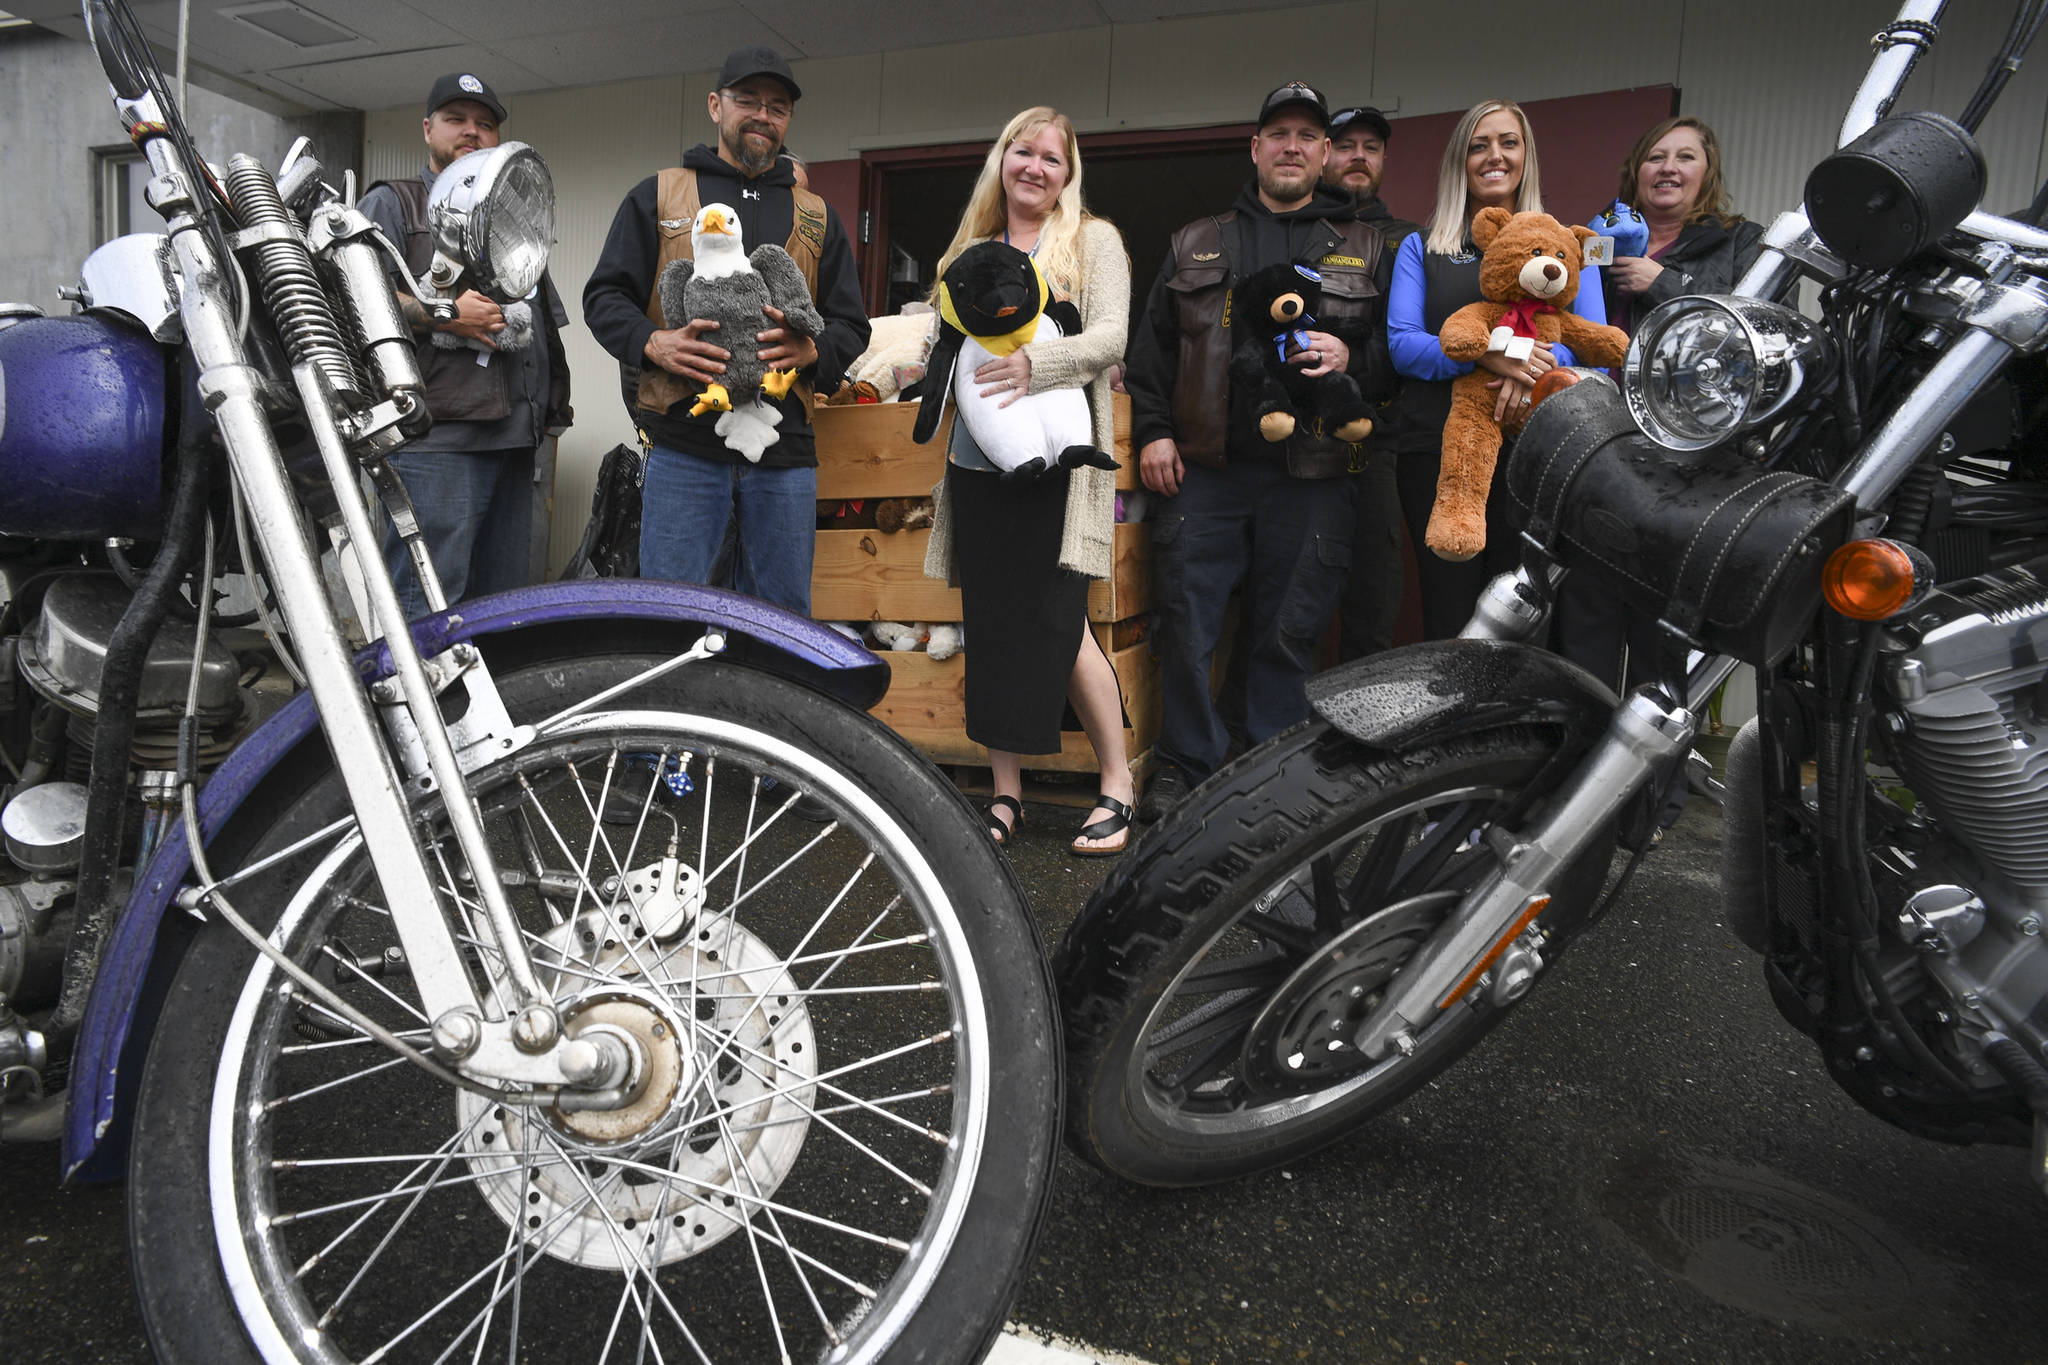 Members of the Panhandlers Motorcycle Club of Alaska pose with staff at Bartlett Regional Hospital on Tuesday, Sept. 3, 2019, with toys collected during the 25th Annual Toy Run for young patients and visitors to the hospital. (Michael Penn | Juneau Empire)